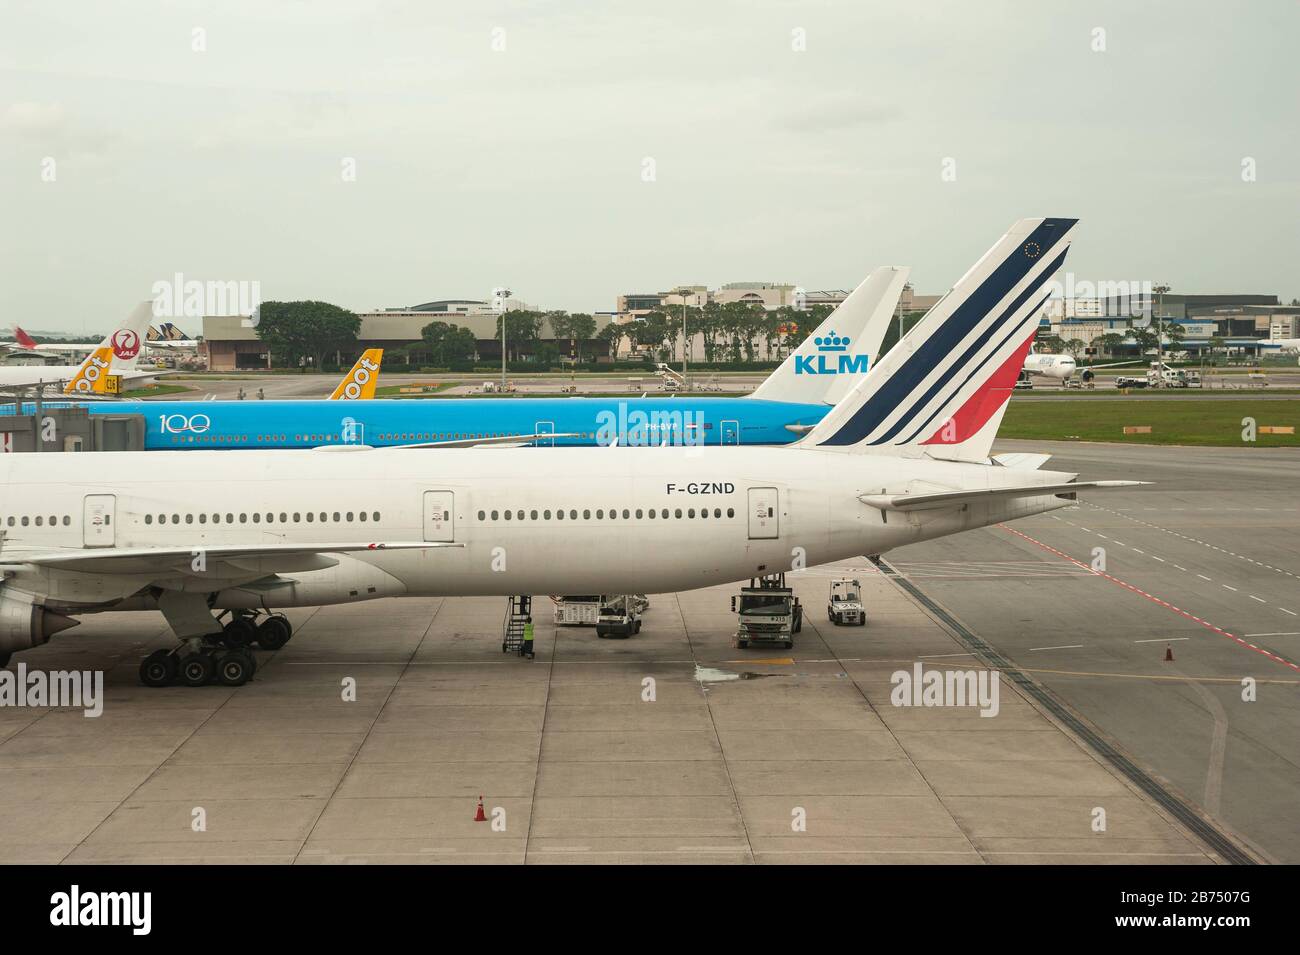 06.12.2019, Singapore, Republic of Singapore, Asia - Two passenger aircraft of Air France and KLM of type Boeing 777-300 ER are parked at Changi Airport. Both airlines are members of the SkyTeam airline alliance. [automated translation] Stock Photo